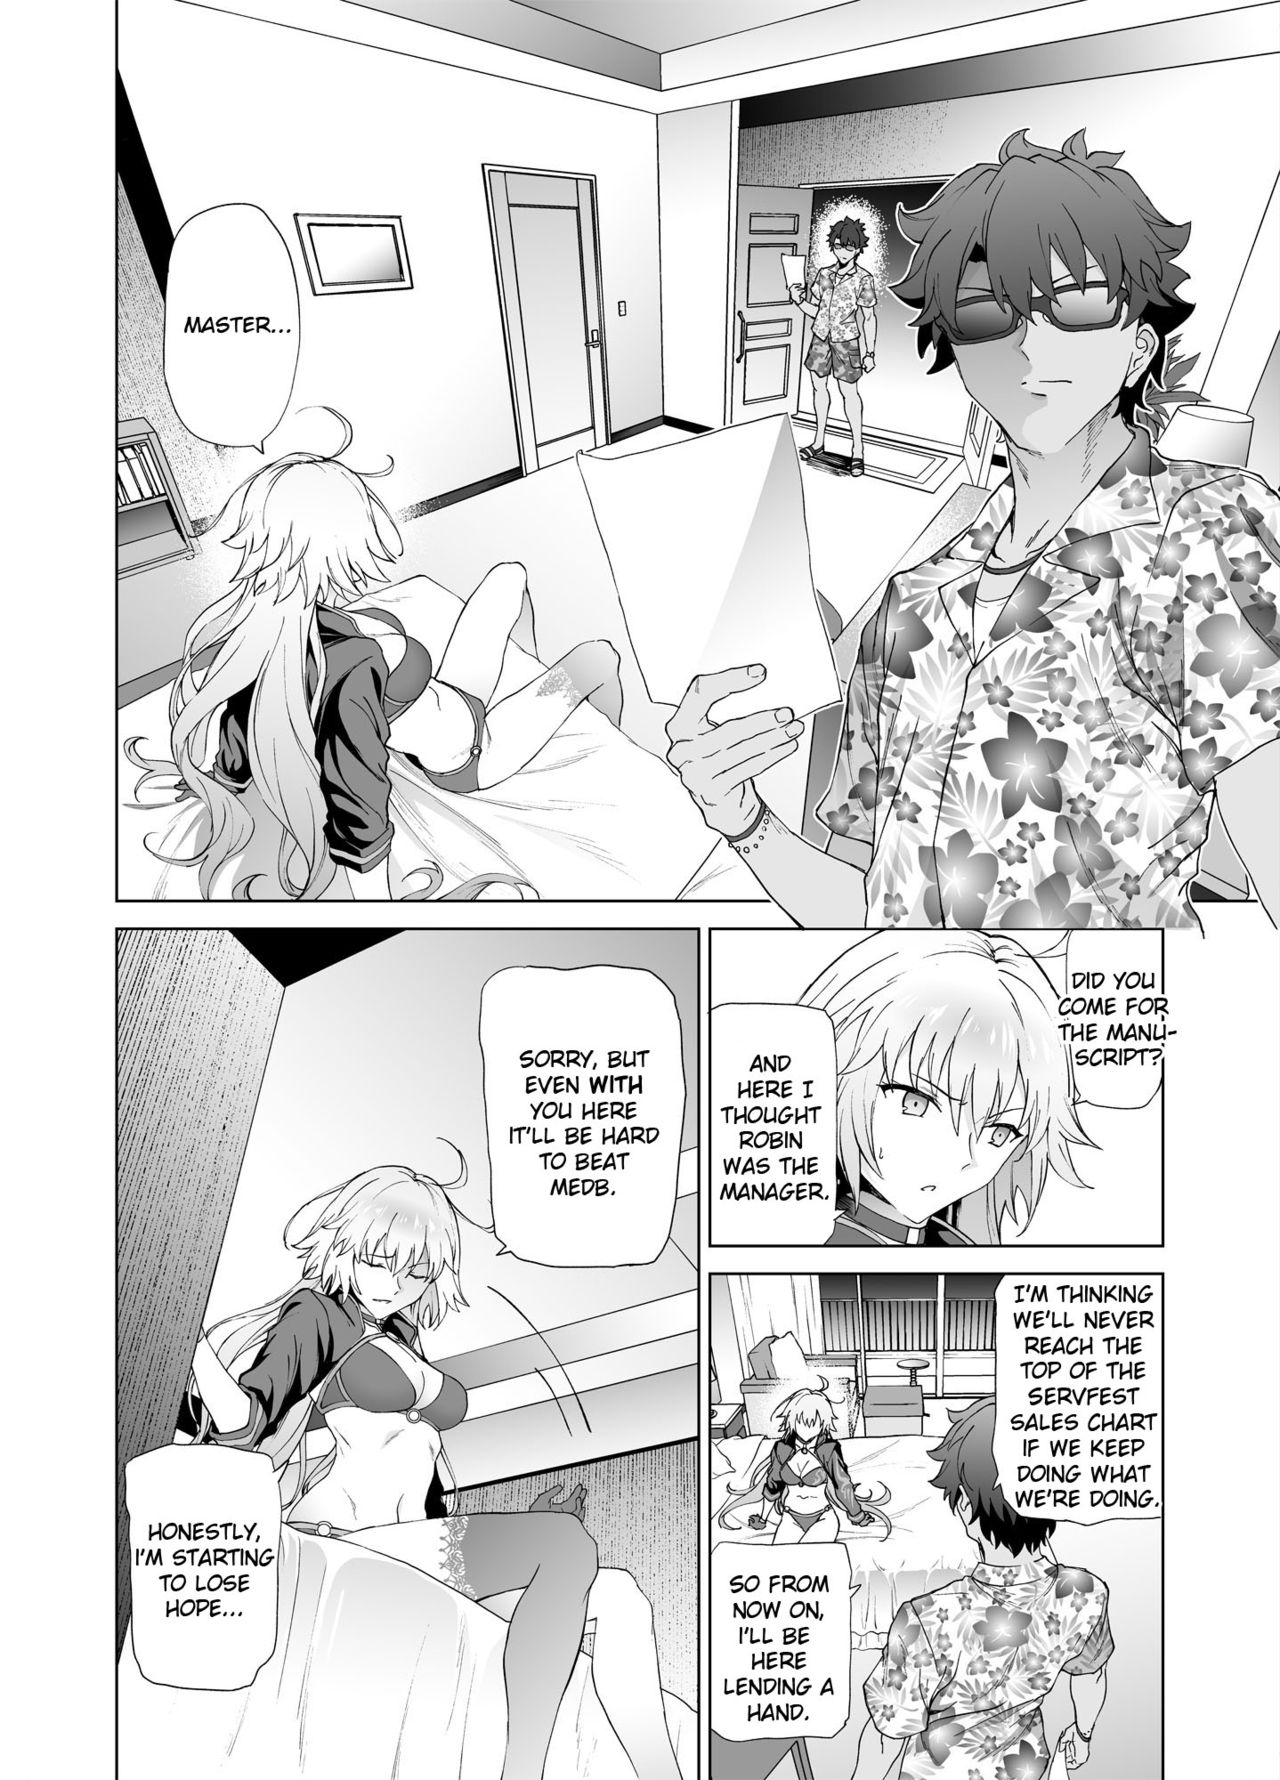 [EXTENDED PART (Endo Yoshiki)] Jeanne W (Fate/Grand Order) [Digital] (English) page 3 full